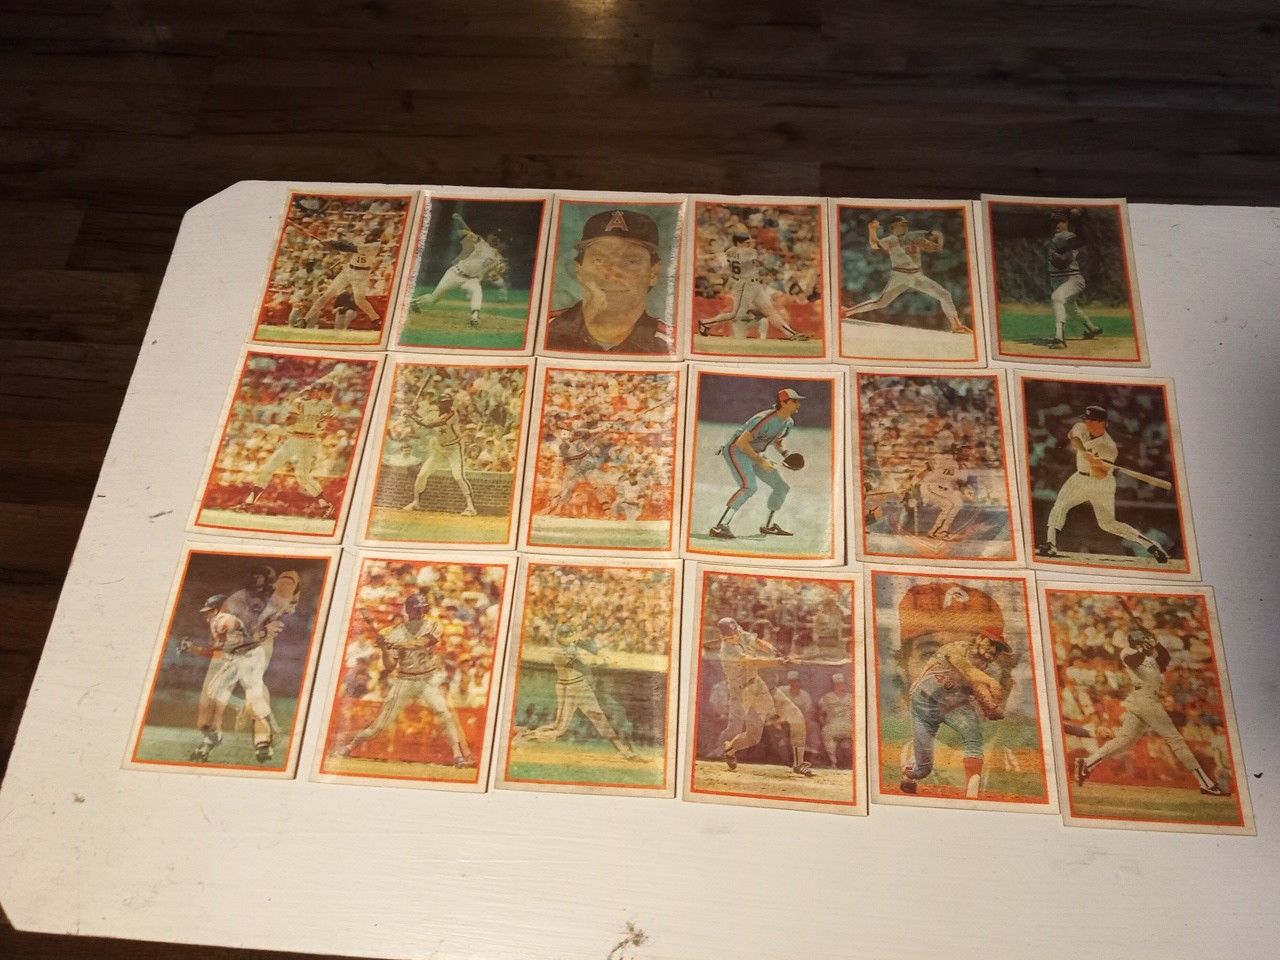 1980 holographic baseball cards 18 of them